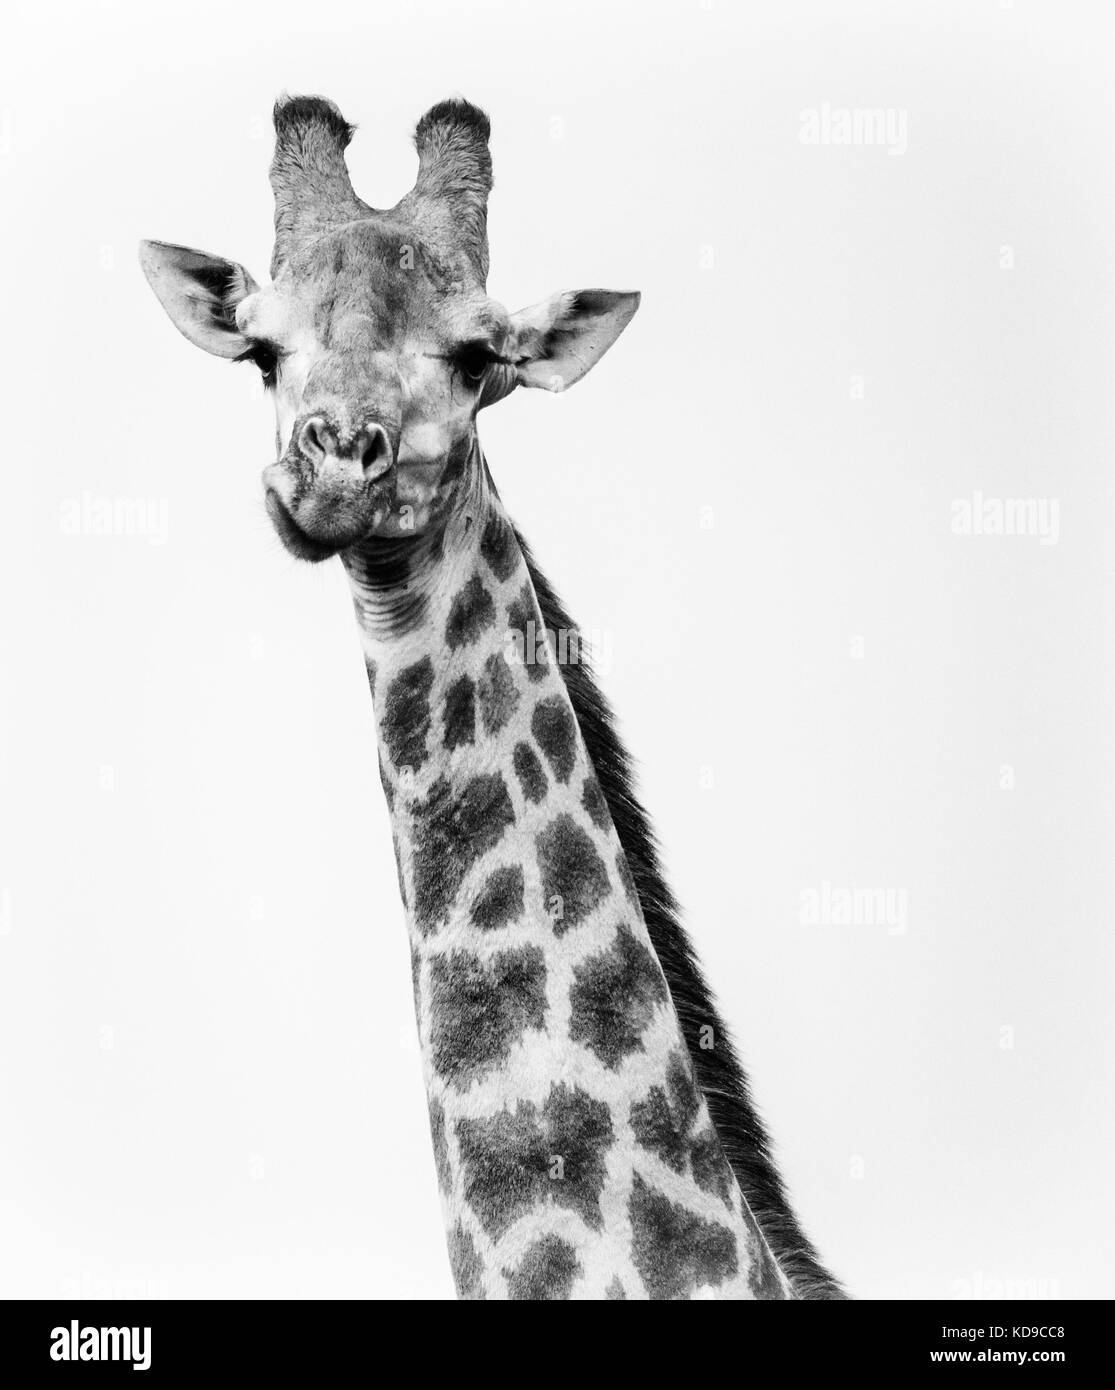 Single Giraffe looking directly at camera while chewing.  High contrast black and white Stock Photo